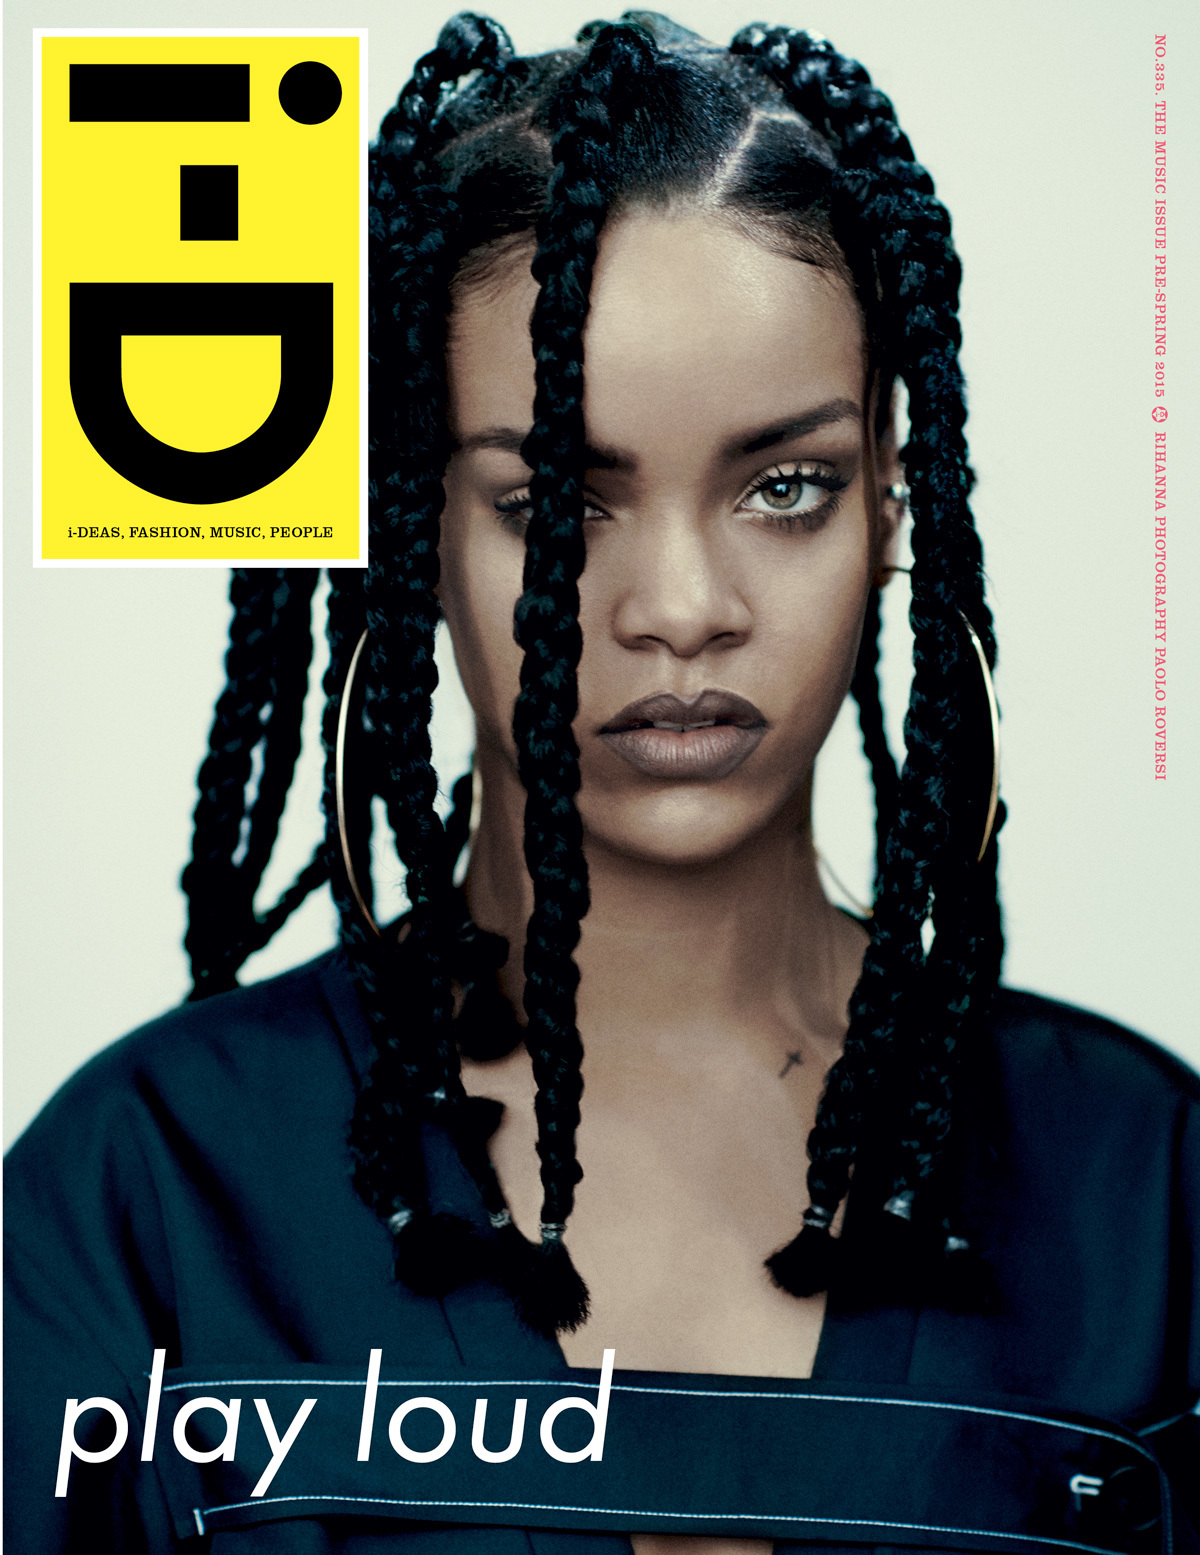 rihanna rocks the cover of i-D's music issue!